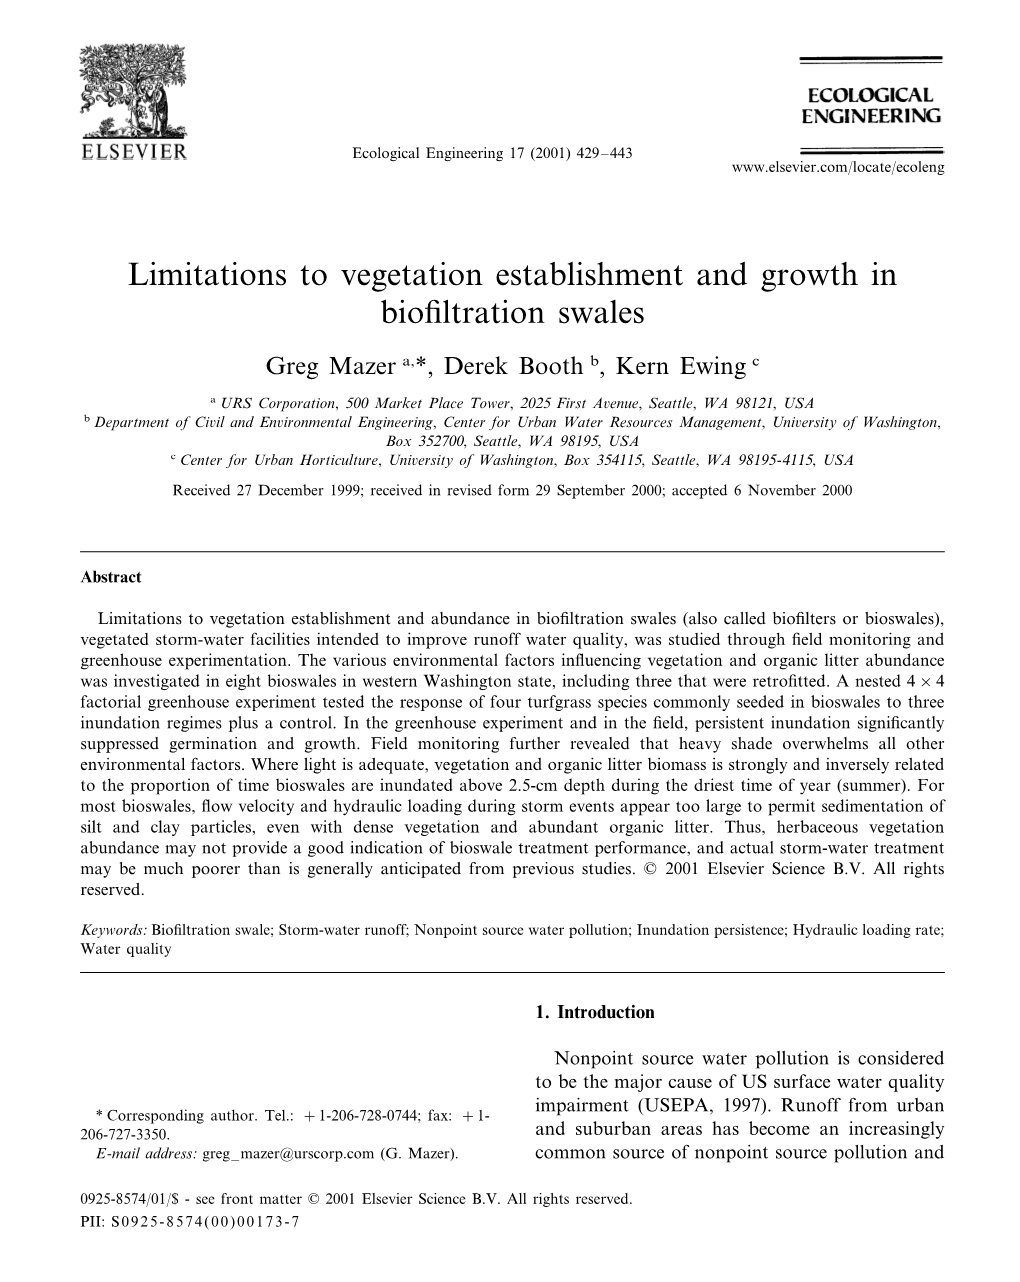 Factors Contributing to Vegetation Growth in Biofiltration Swales